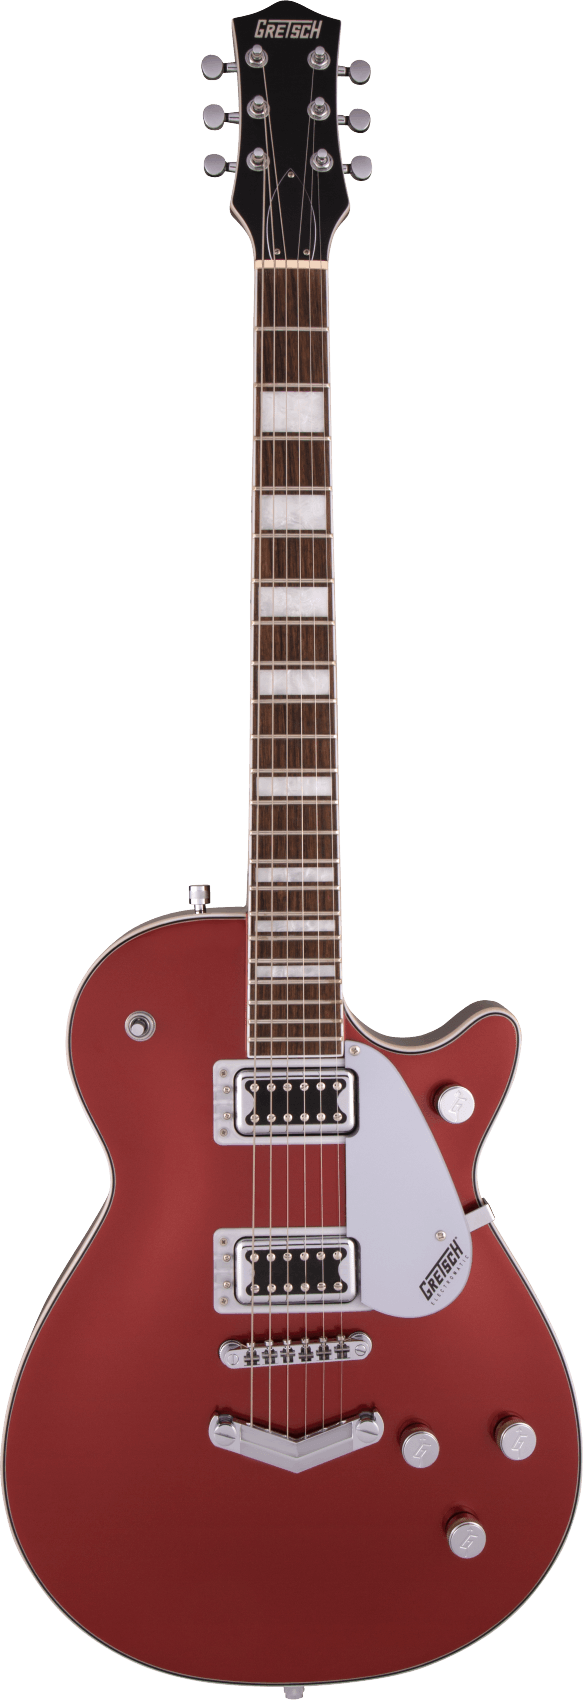 Gretsch G5220 Electromatic Jet BT Single-Cut with V-Stoptail, Firestick Red